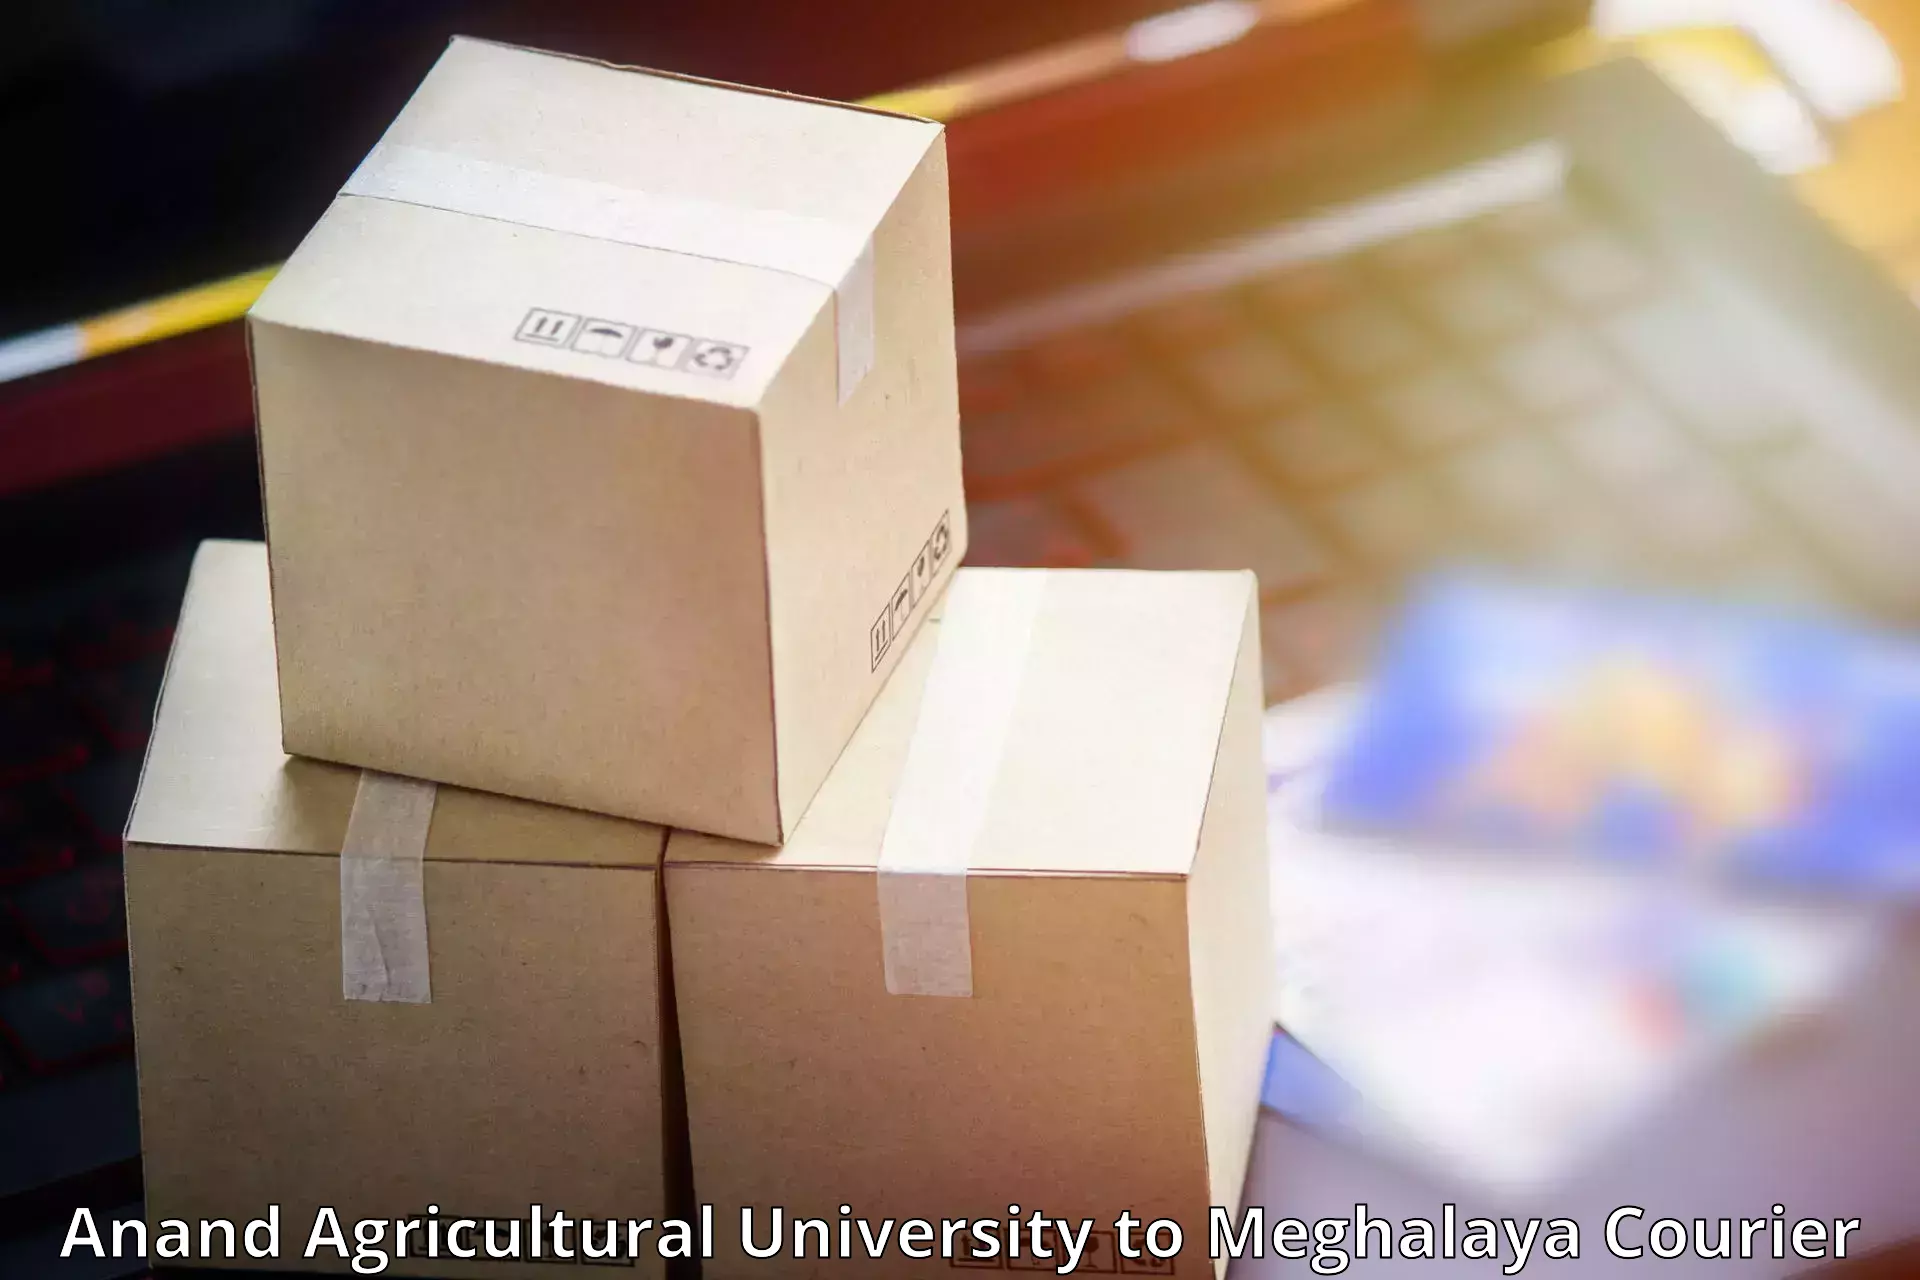 Corporate courier solutions Anand Agricultural University to Cherrapunji